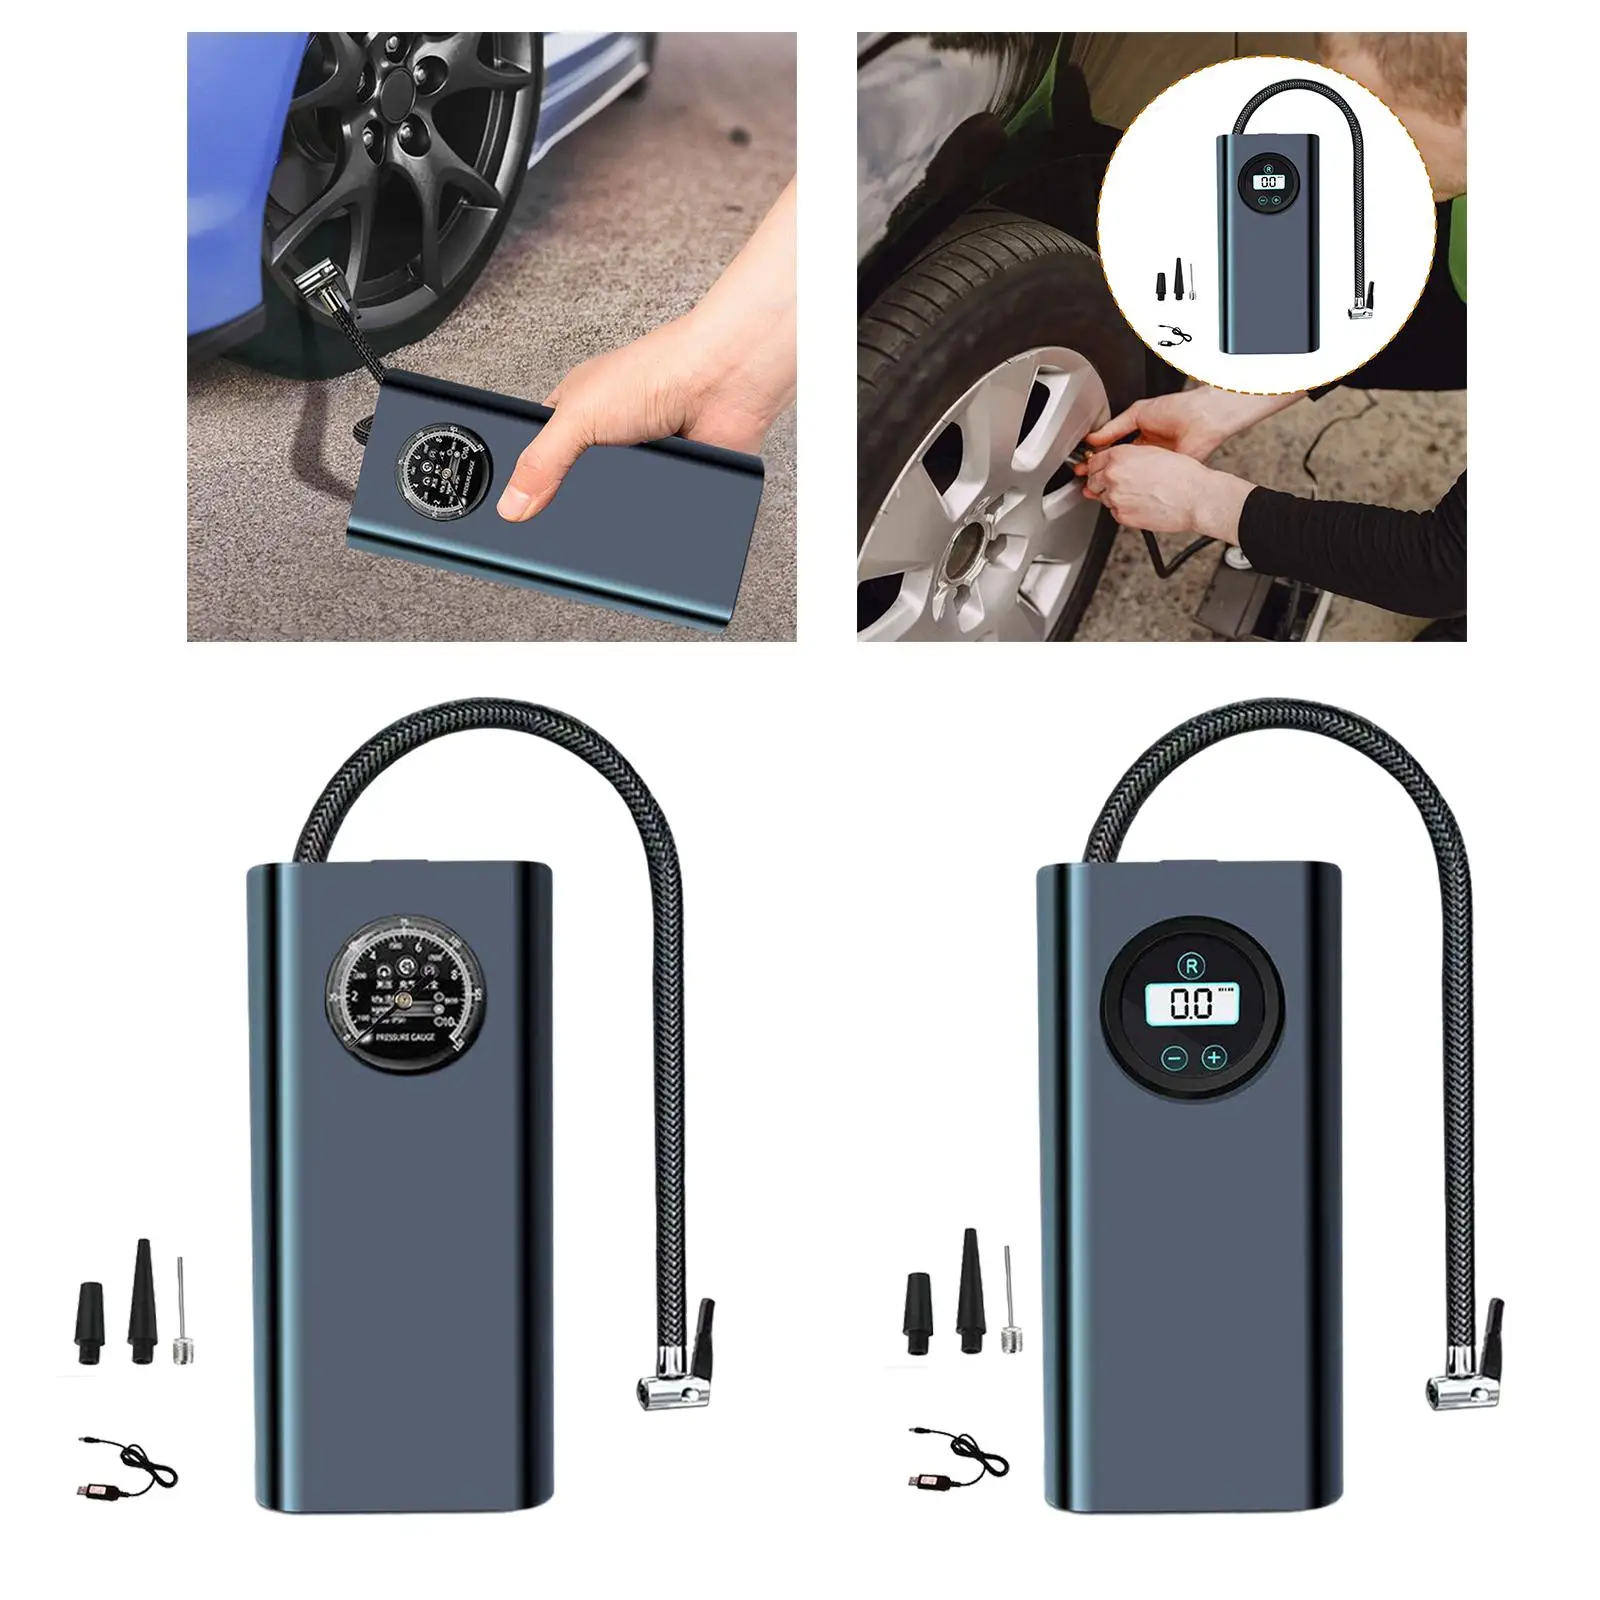 Cordless Tire Inflator Portable Air Compressor for Cars Motorcycle SUV